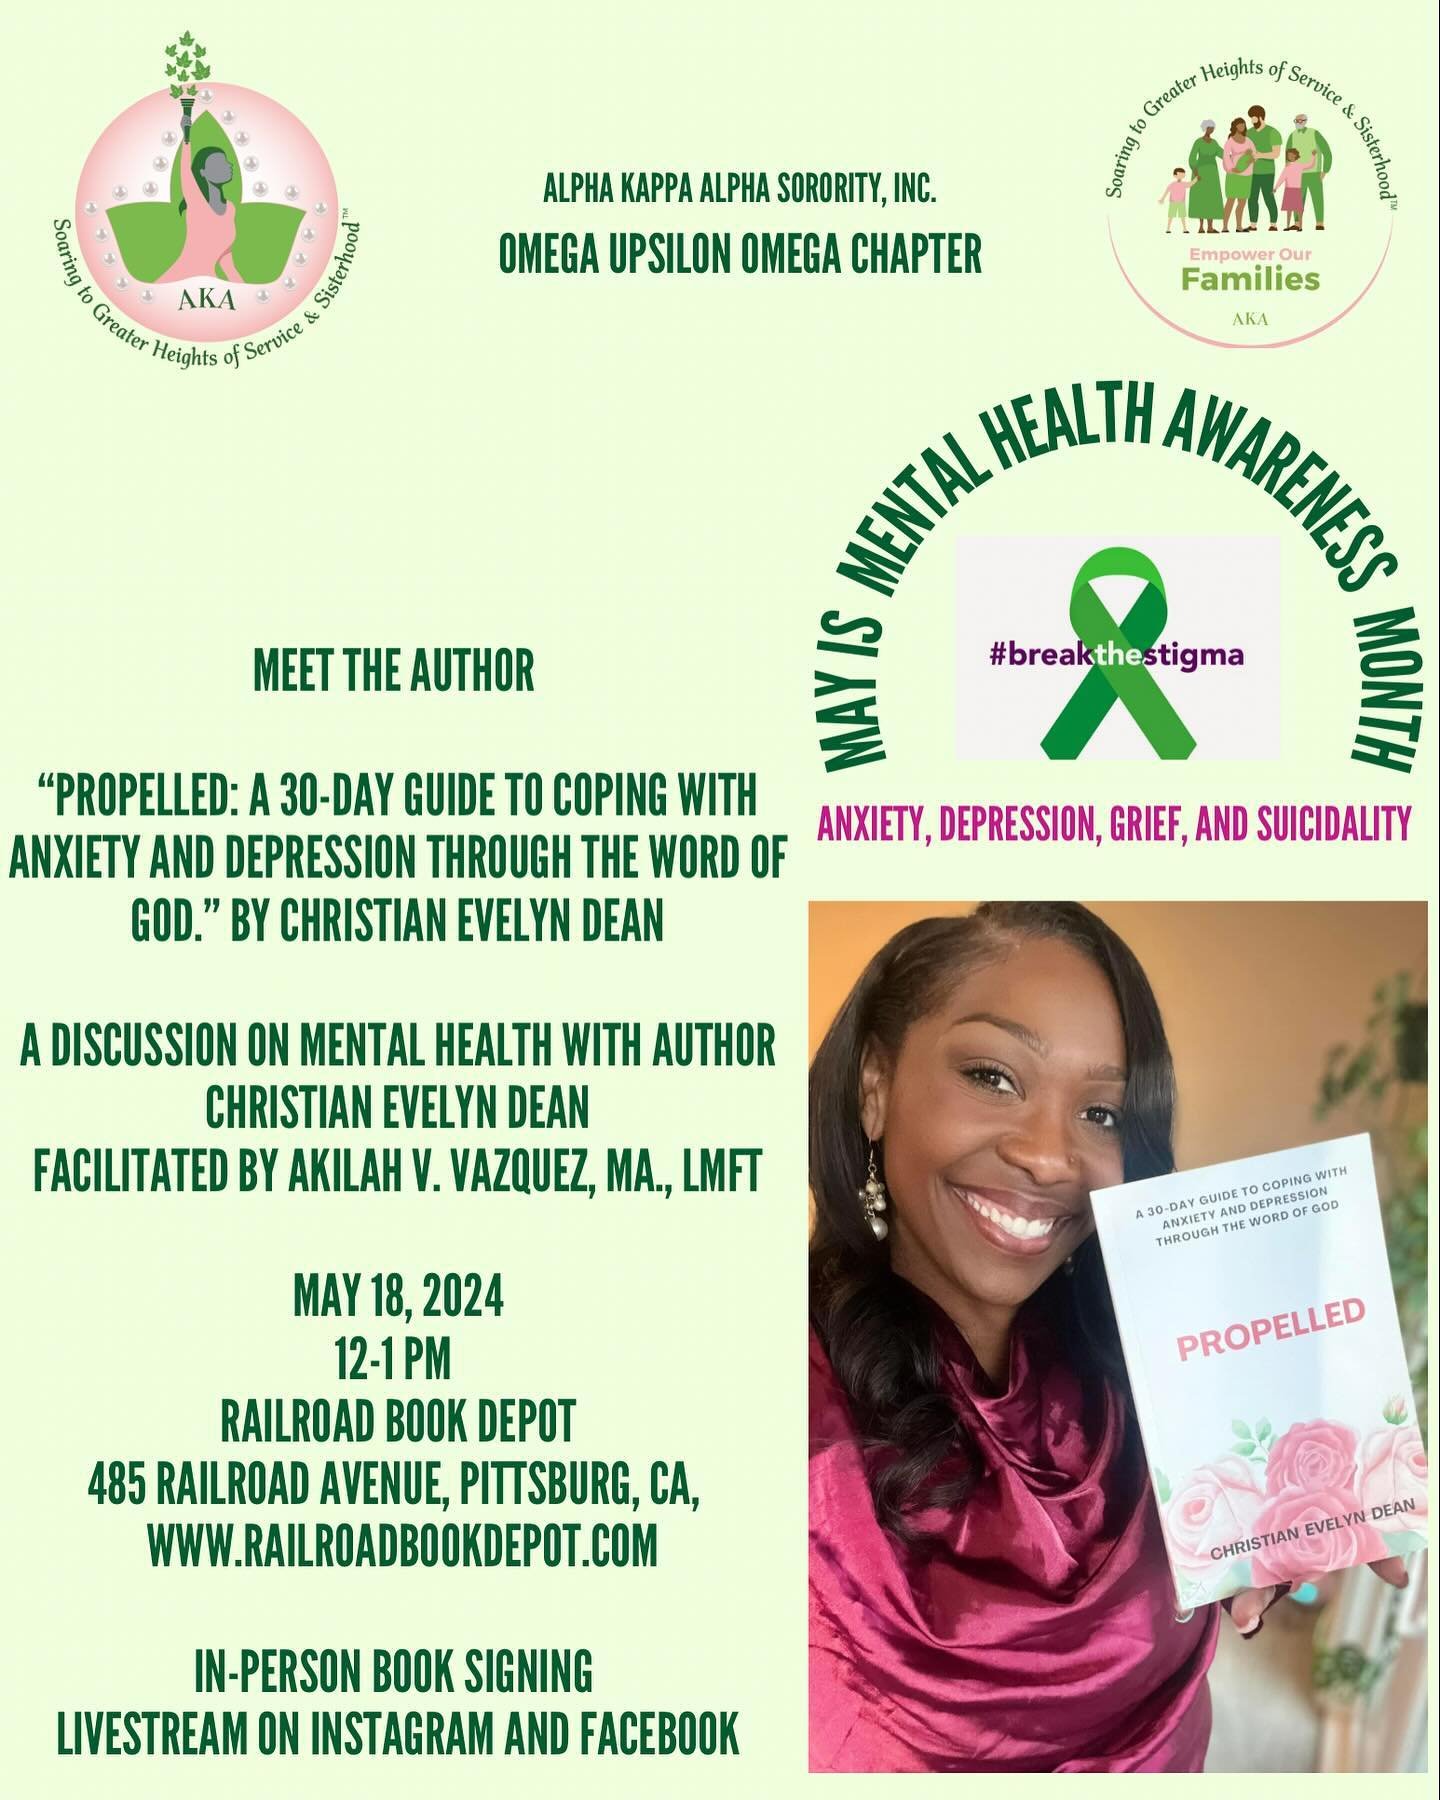 It&rsquo;s Mental Health Awareness Month!  The Omega Upsilon Omega Chapter of Alpha Kappa Alpha Sorority, Inc. and the Empower Our Families committee are committed to promoting mental wellness, fostering open conversations, and celebrating the streng